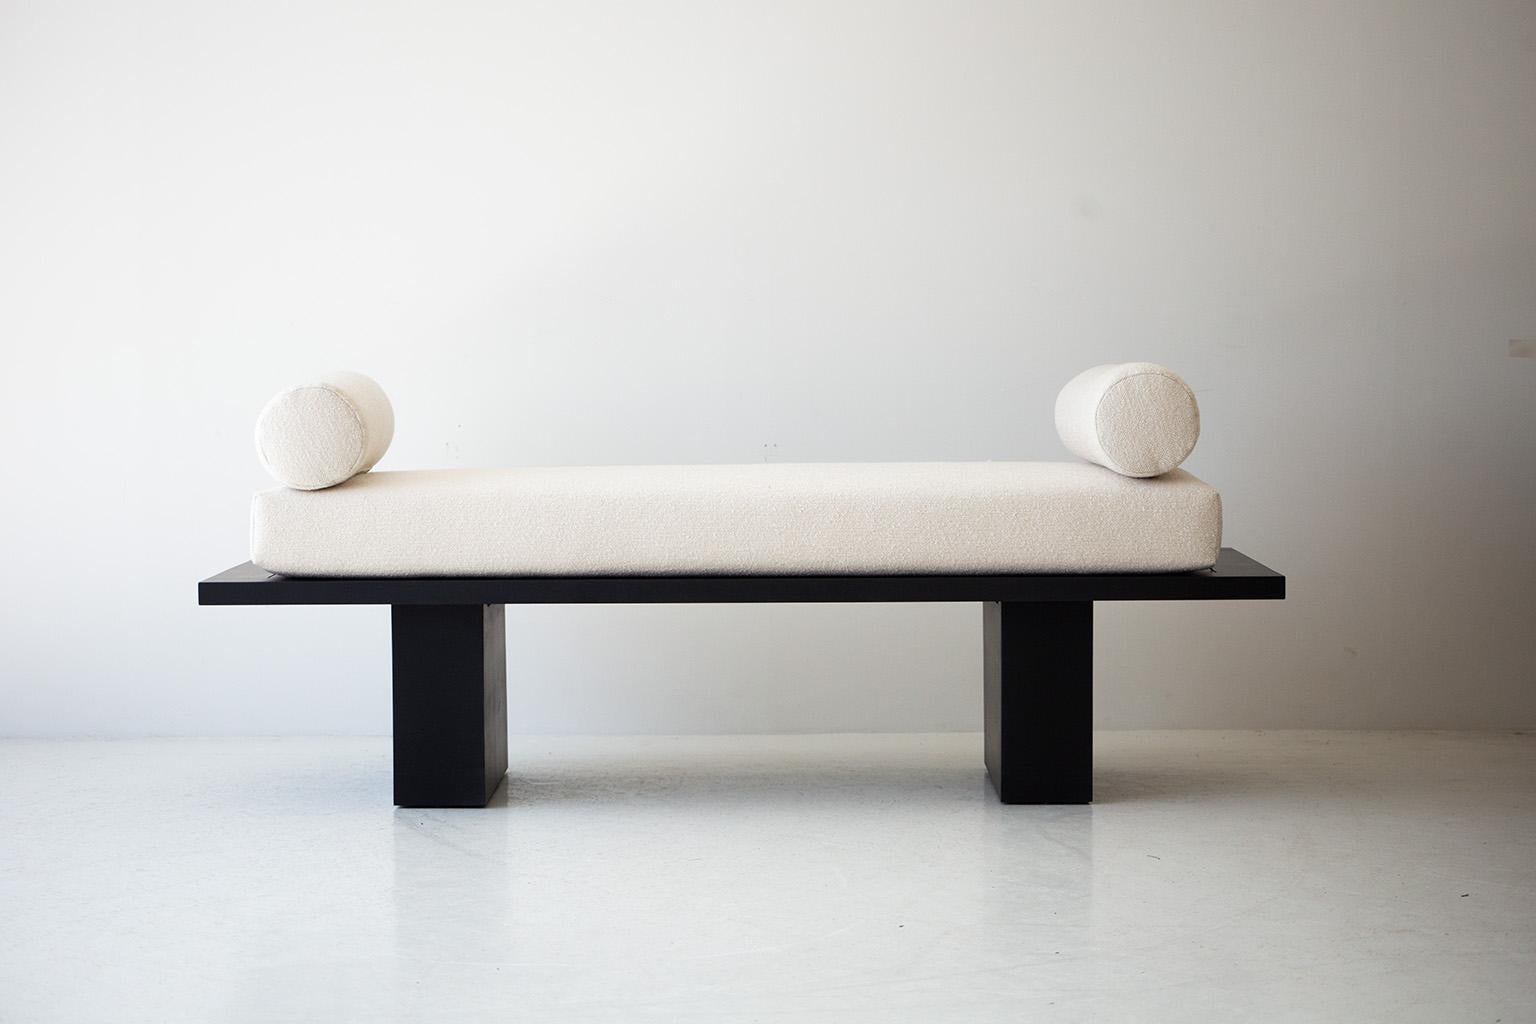 This Suelo Modern Daybed is beautifully constructed from solid wood in Ohio, USA. This silhouette is simple, modern, and sleek, topped with a comfortable cushion. This is the perfect daybed for any space, indoor or outdoor. The Suelo Collection